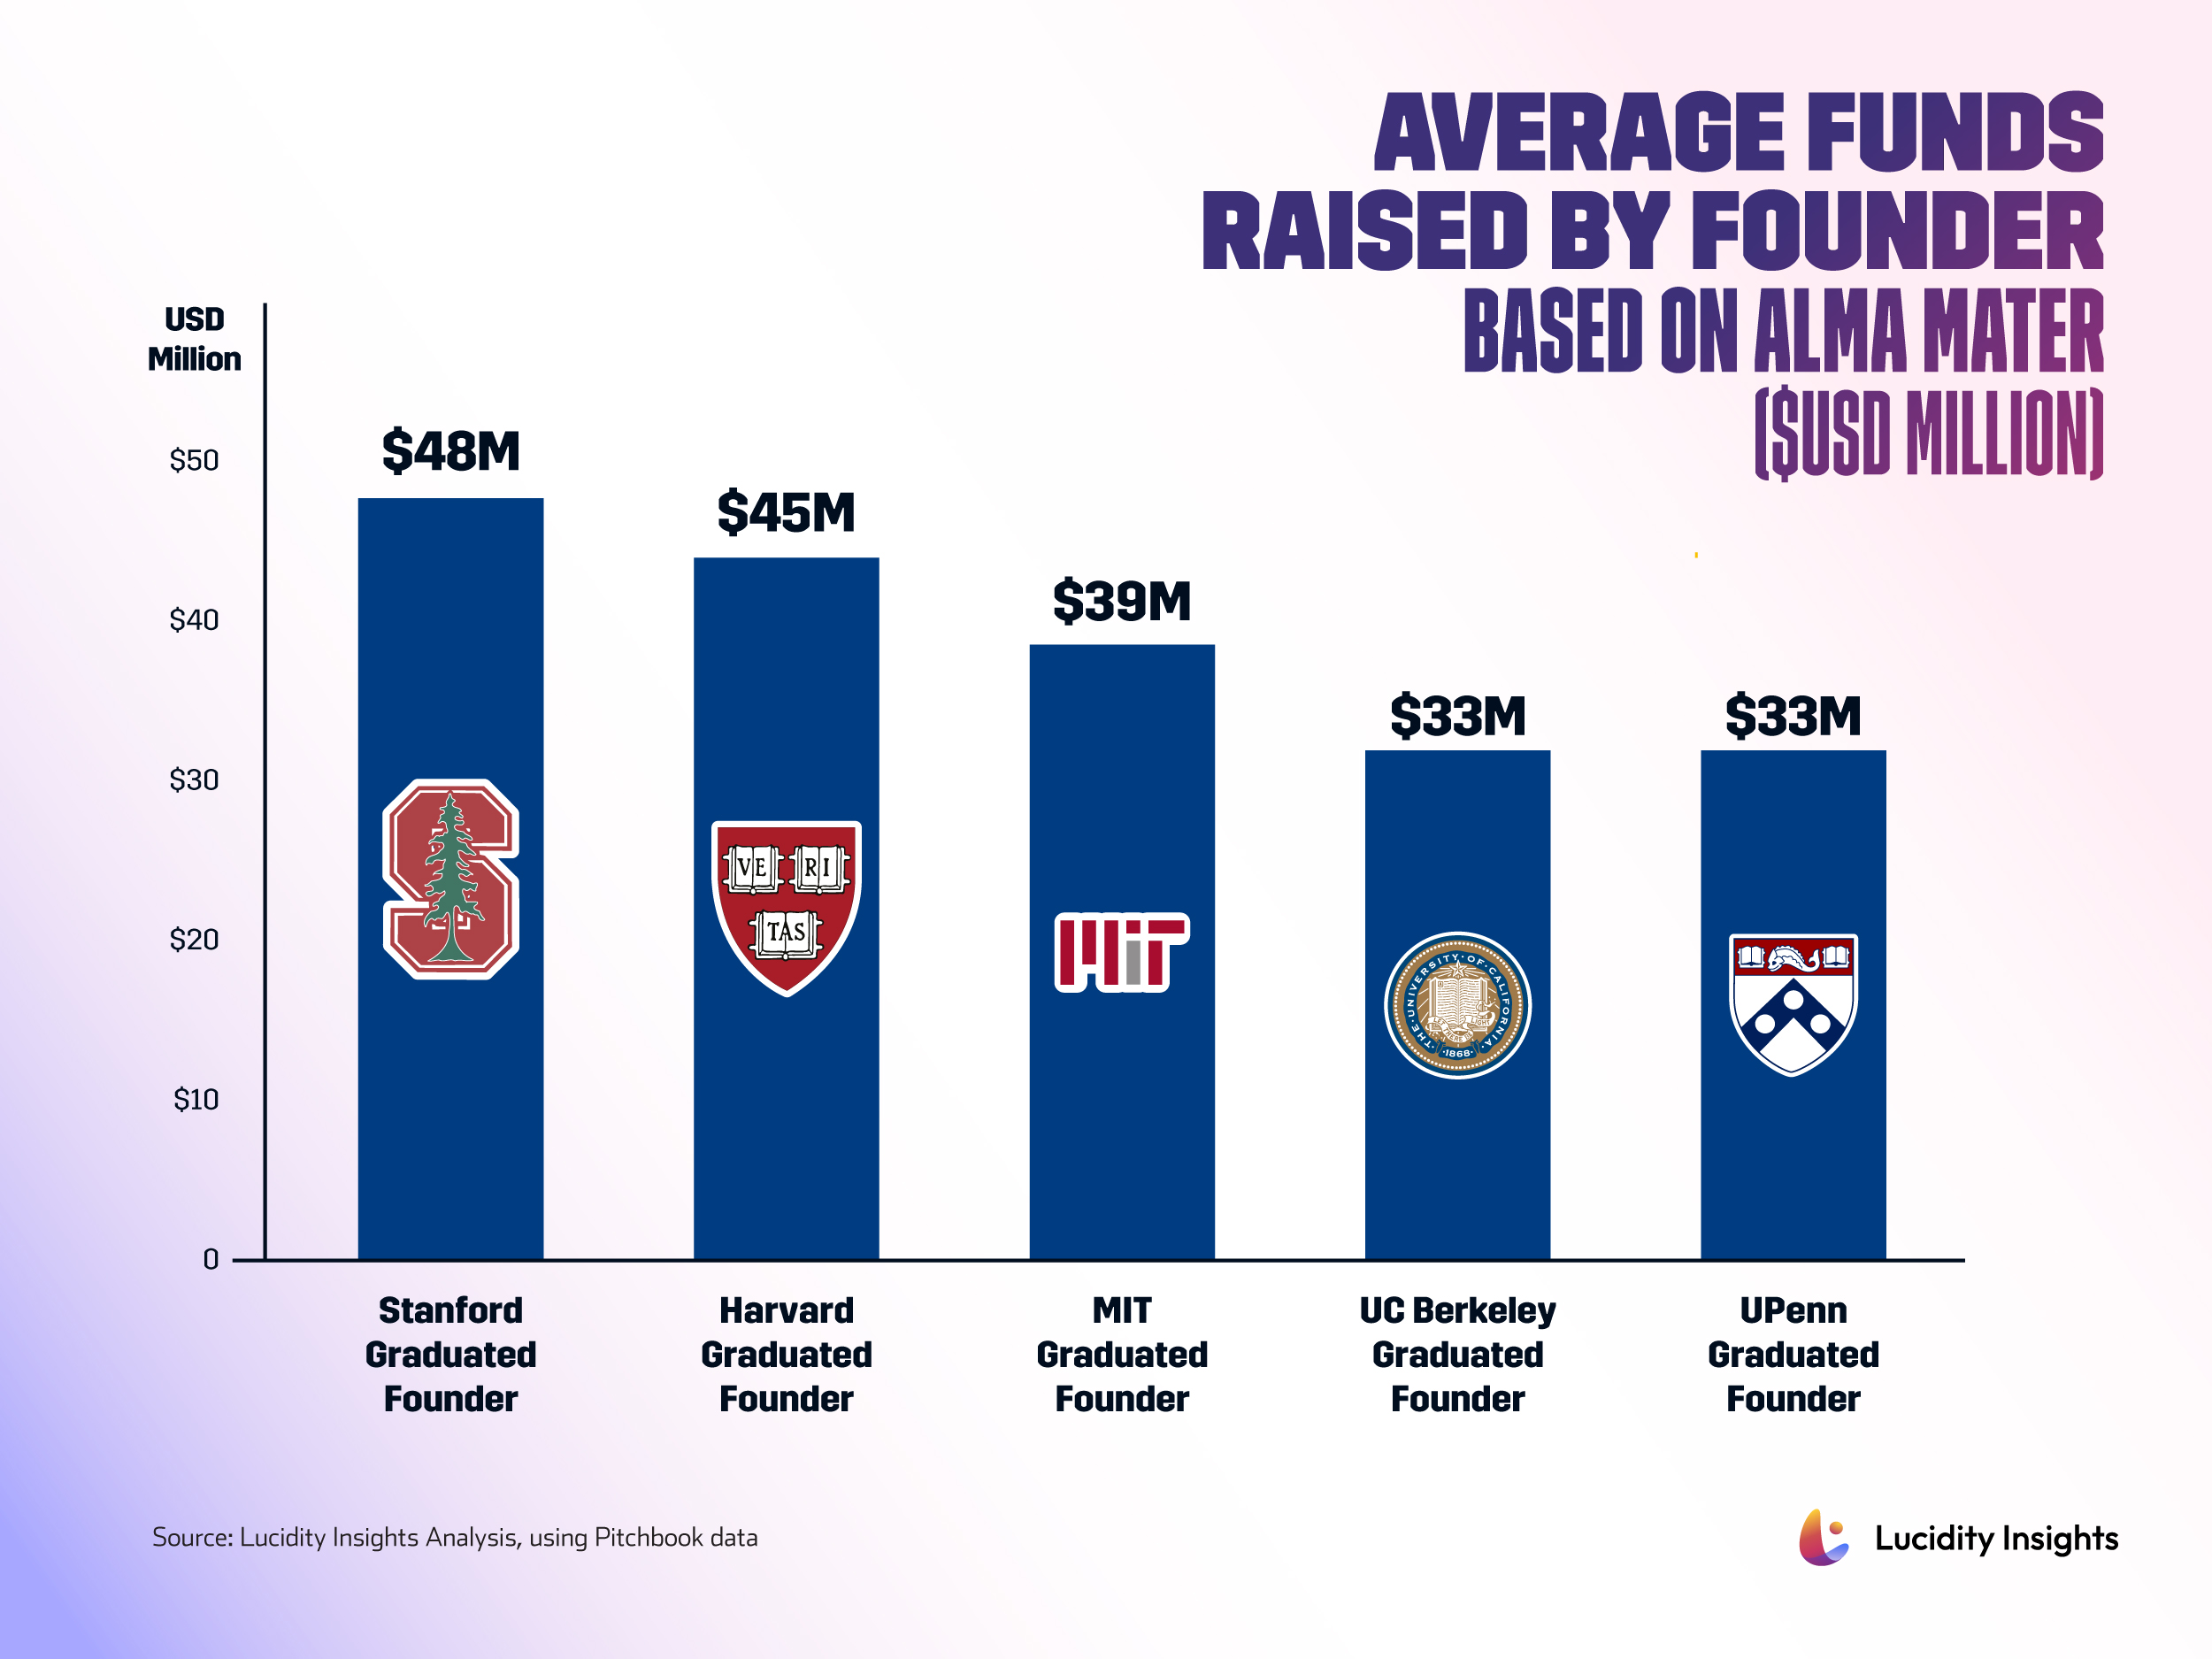 Average Funds Raised by Founder Based on Alma Mater ($USD Millions)